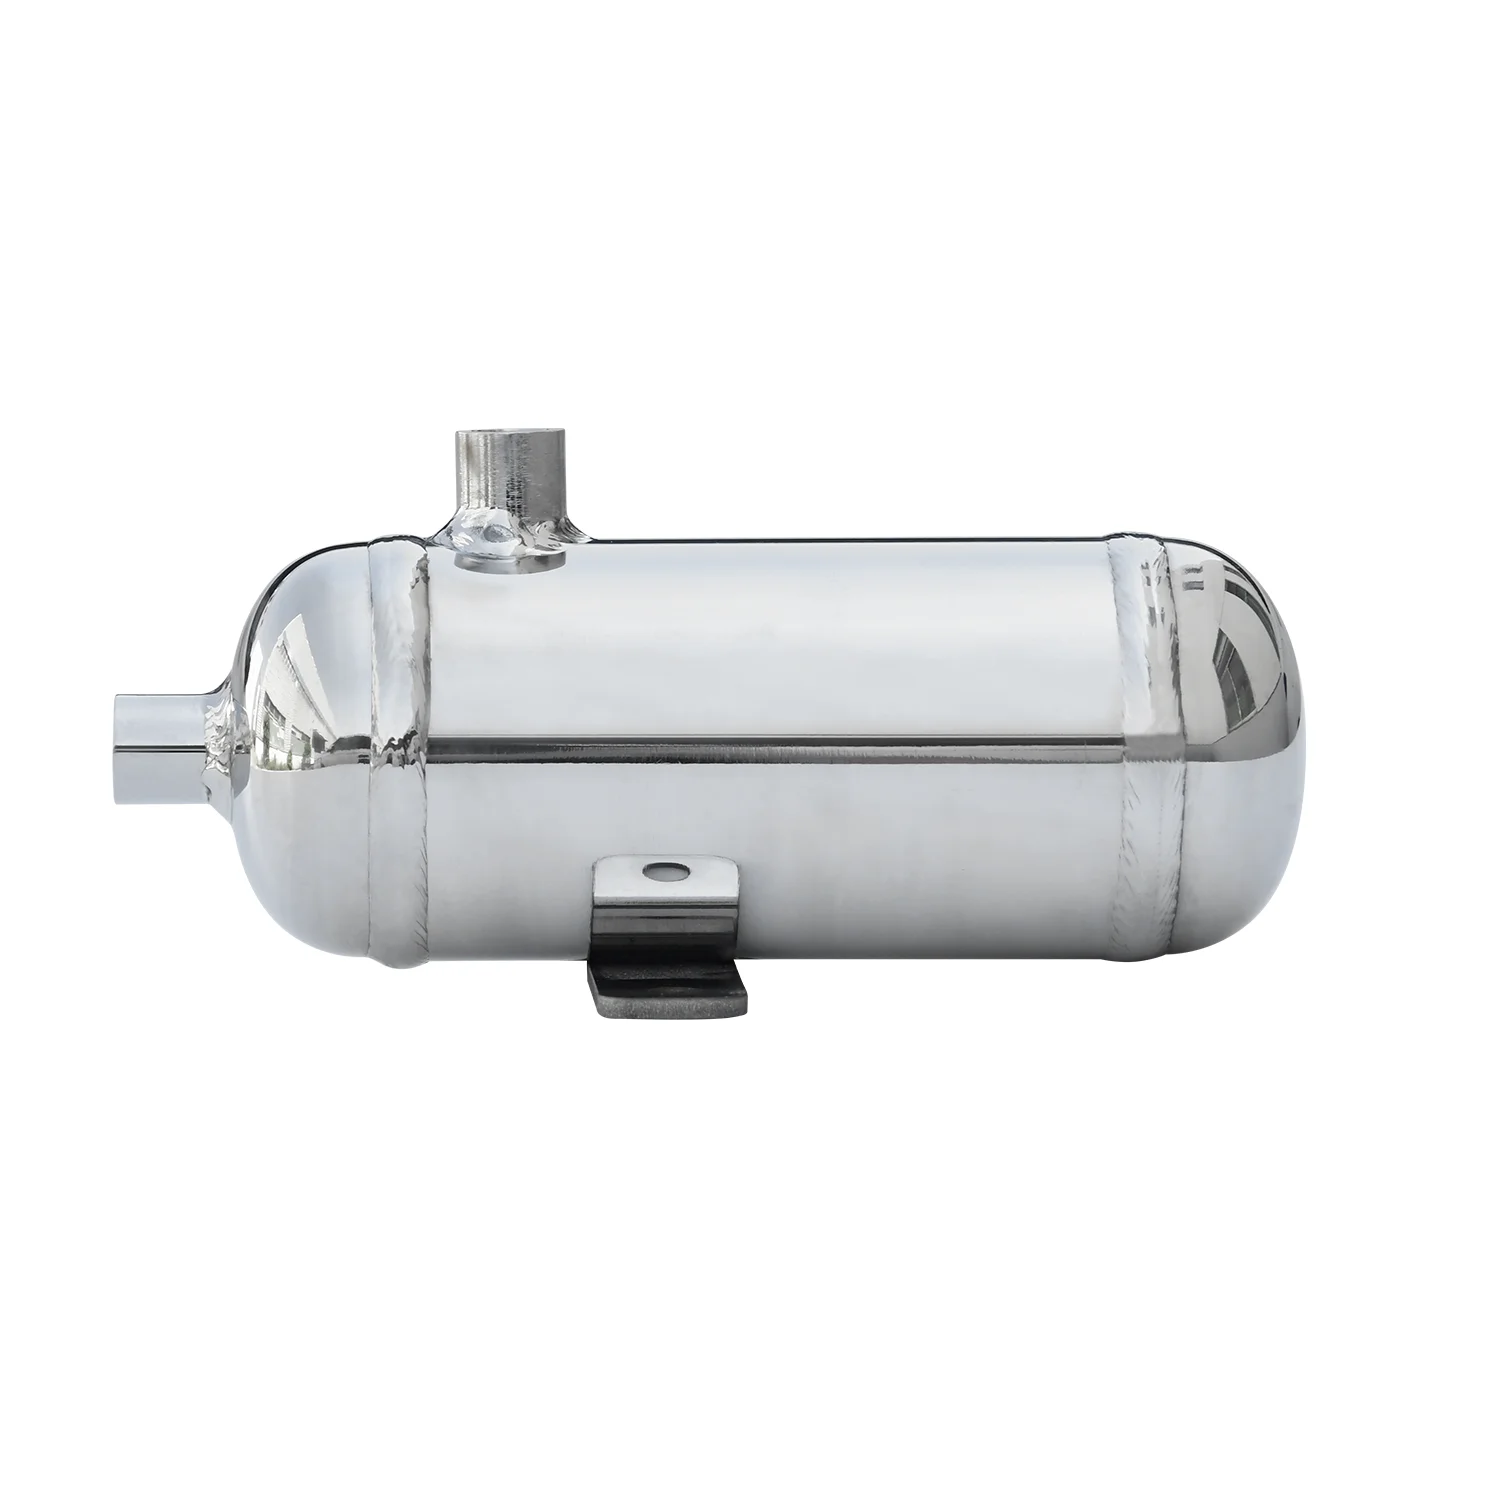 0.3L 304 Stainless Steel Small Horizontal Air Compression Tank Vacuum  Buffer Air Storage Suitable for Beauty Instruments